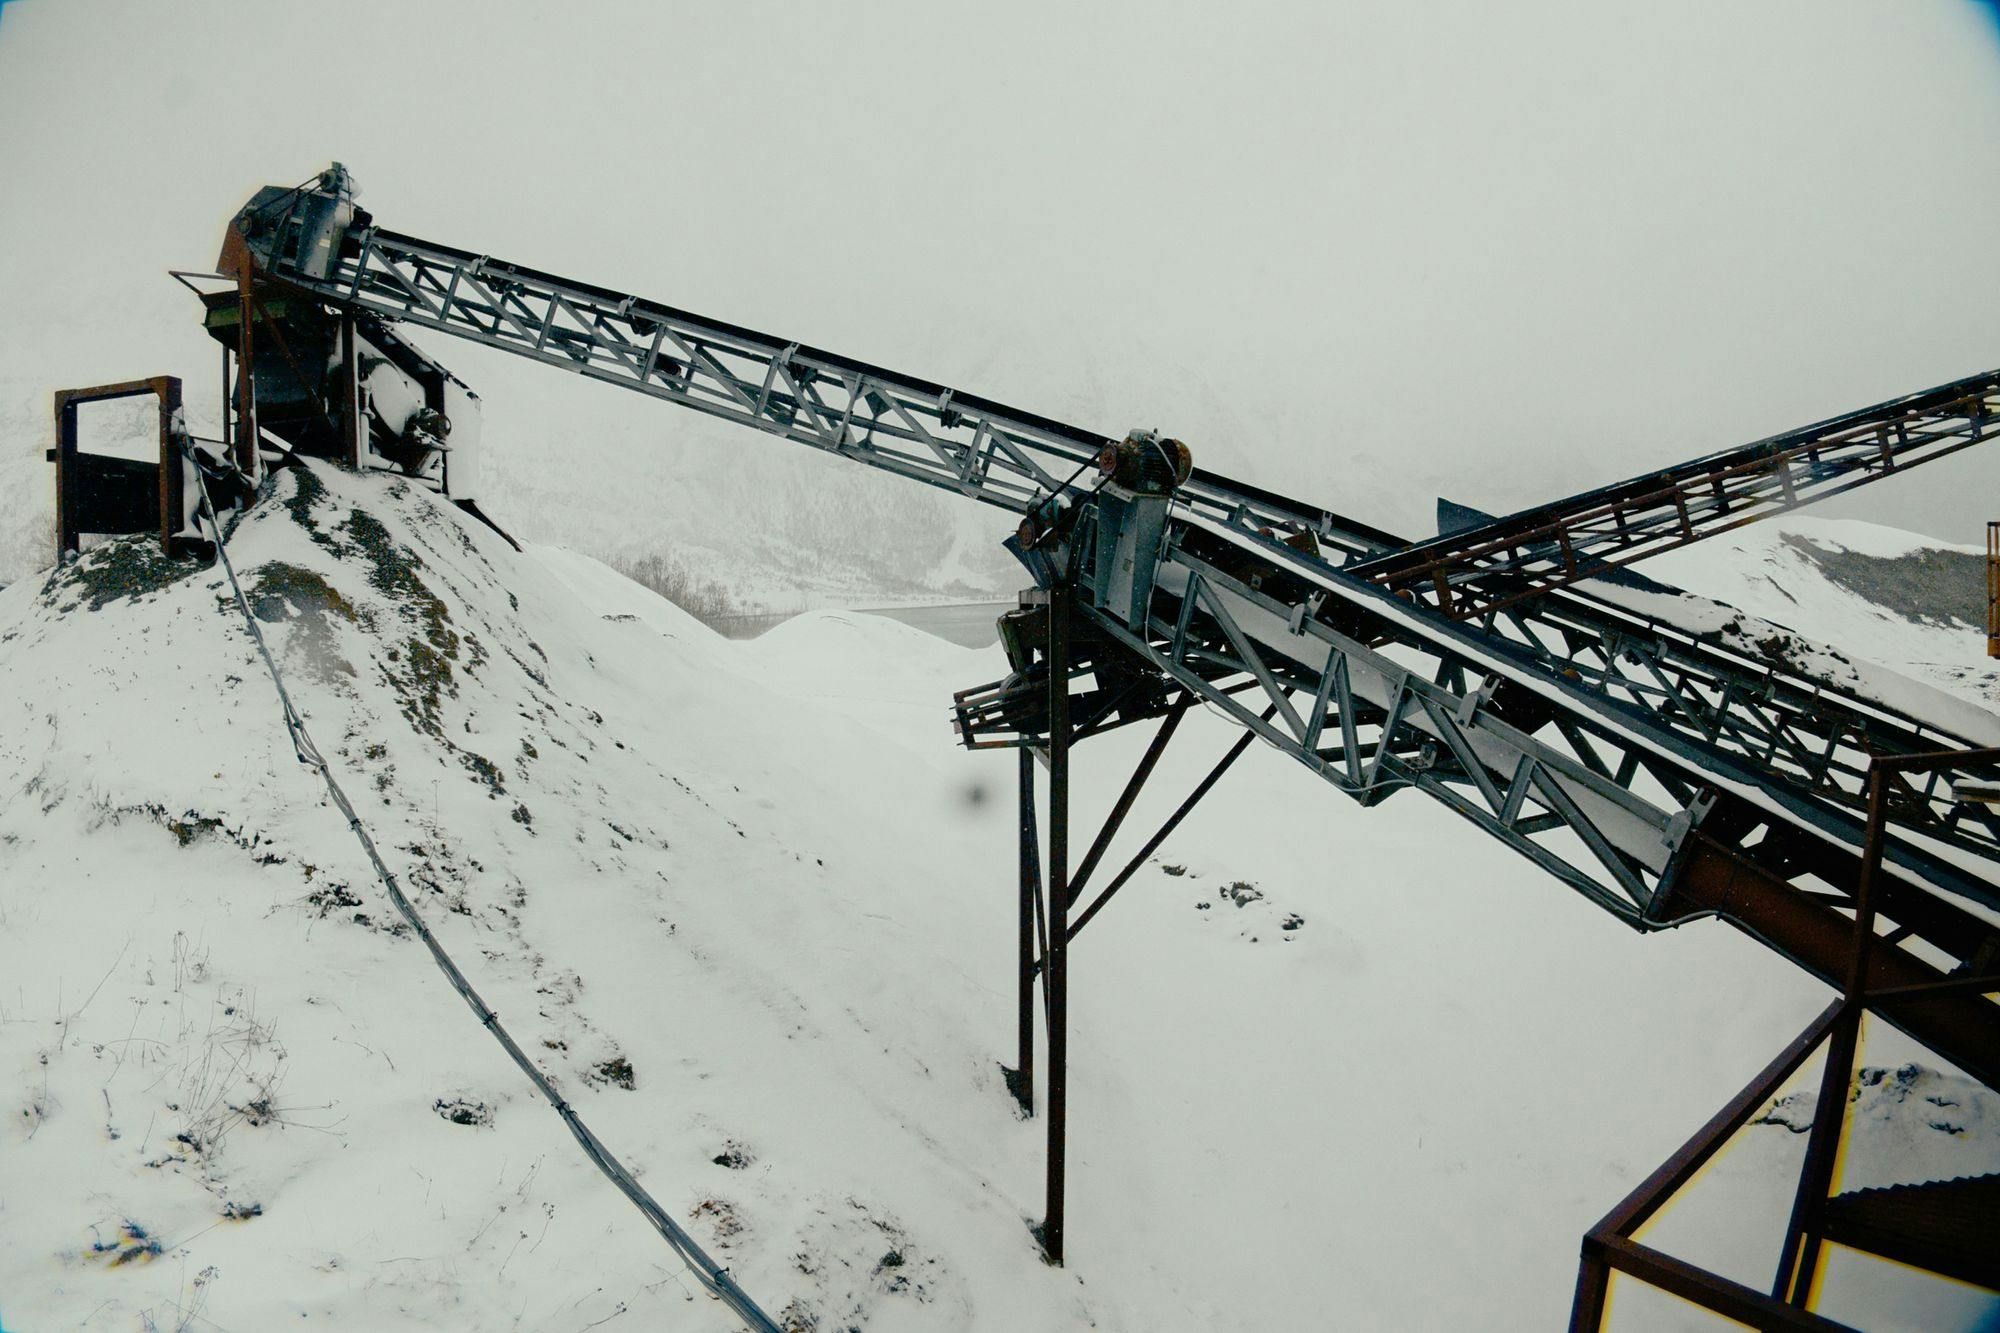 A decrepit industrial mining equipment covered in snow